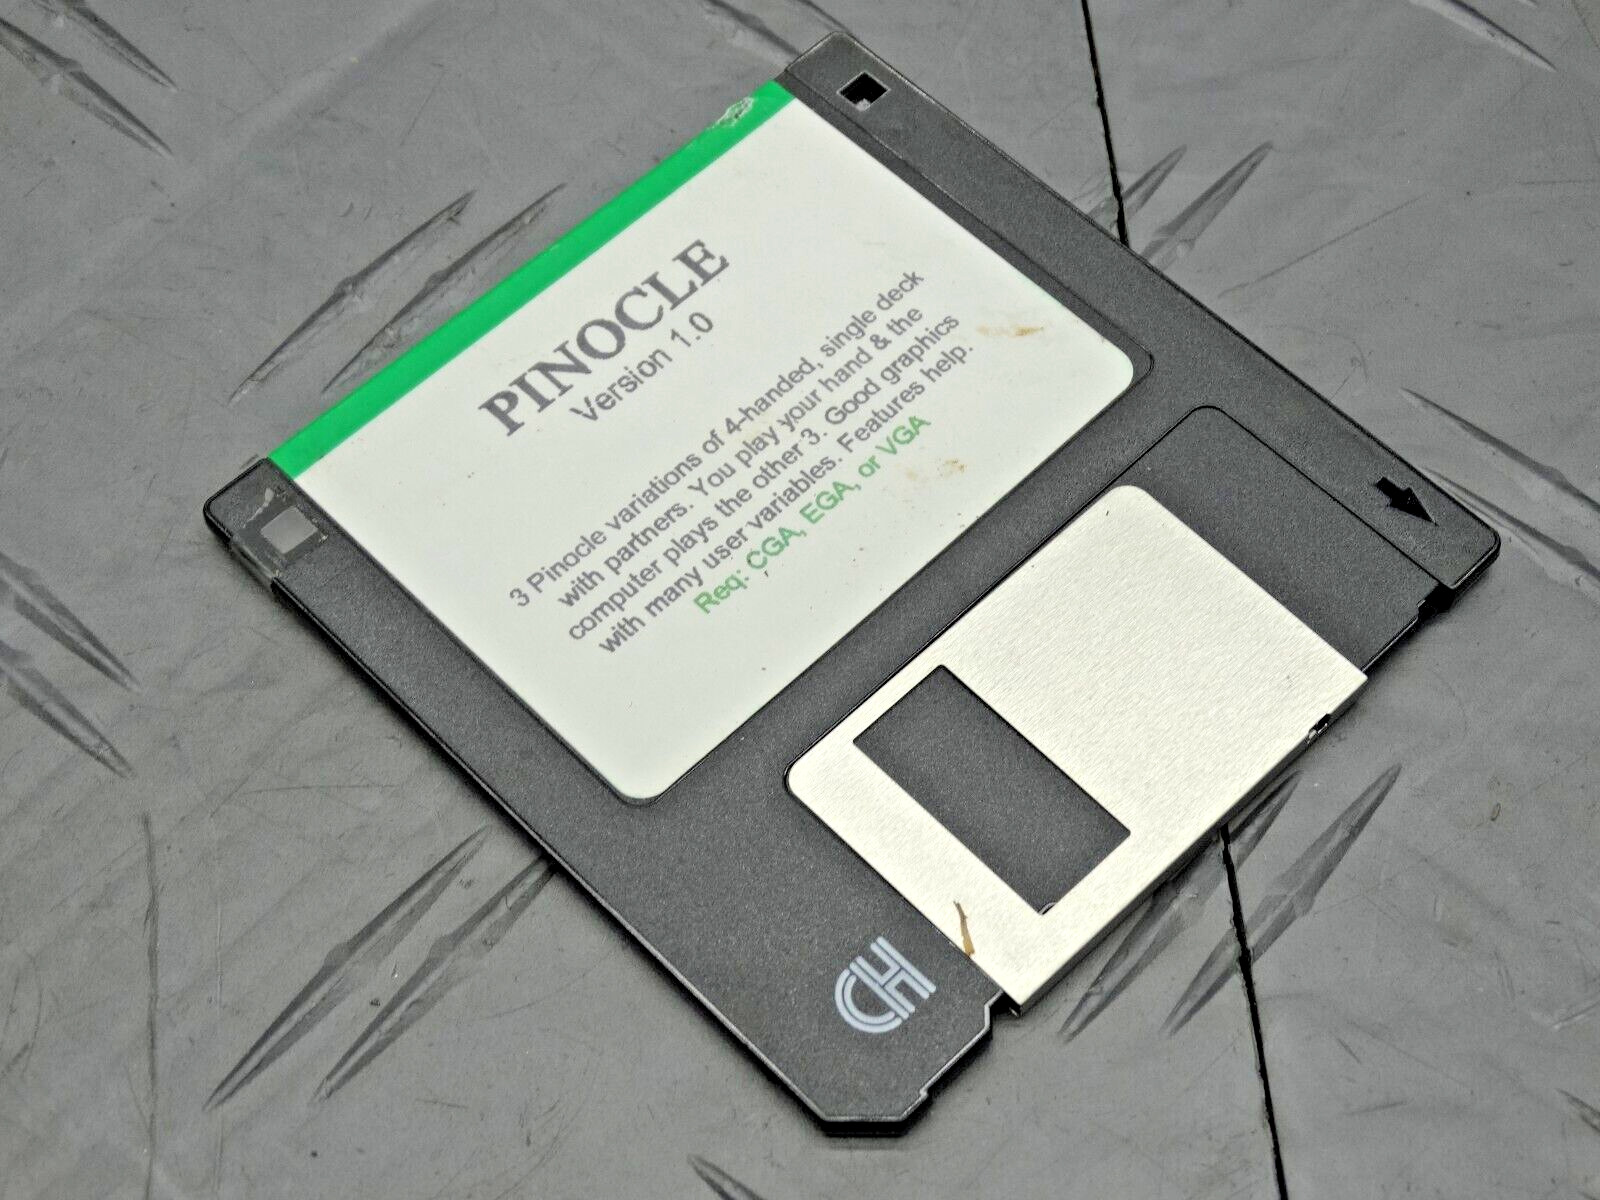 News of the Past Date back to 1900s Floppy 3.5” Floppy Software Vintage